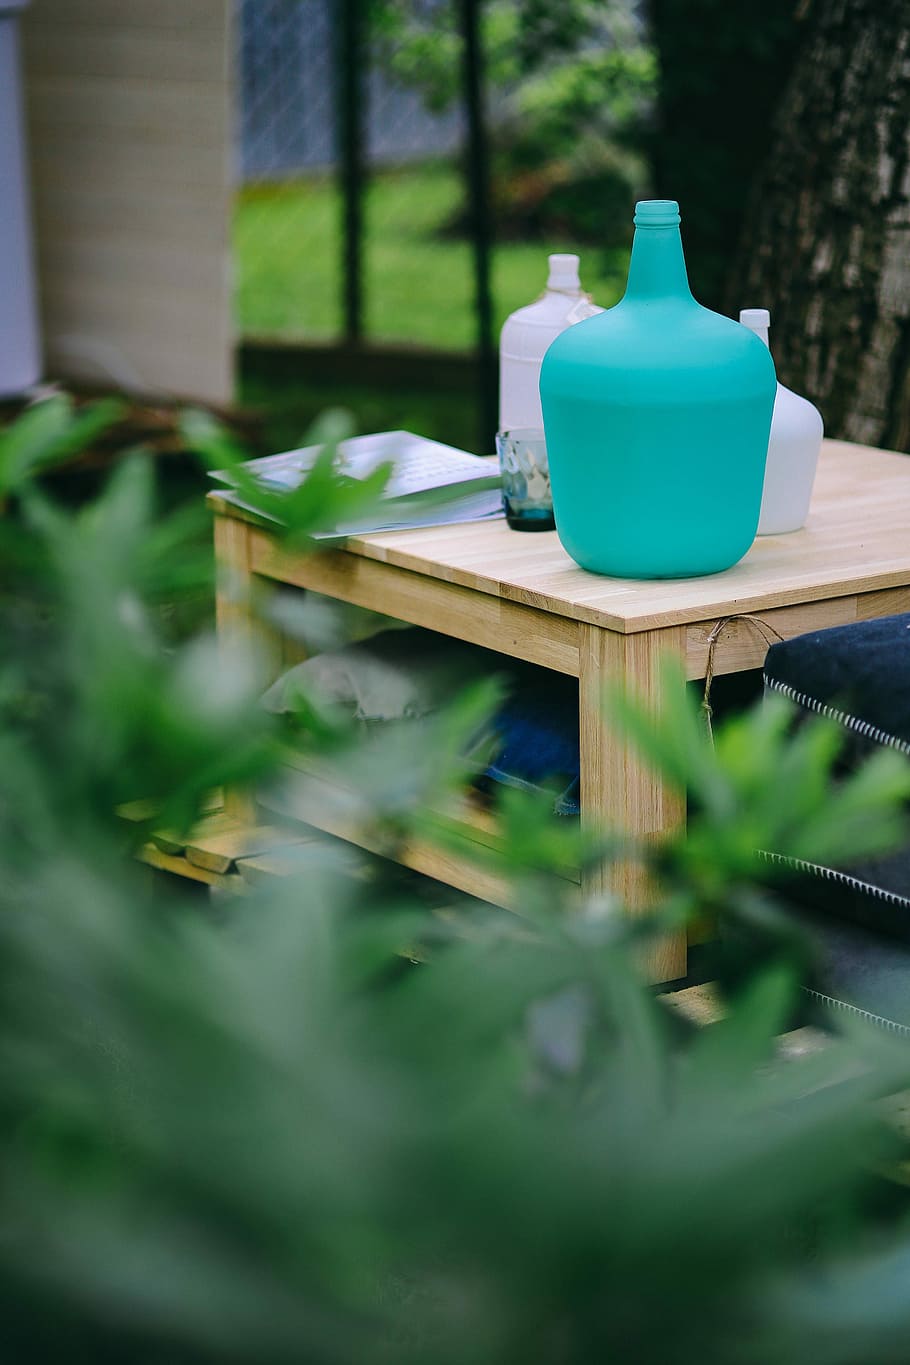 items, sunny, garden, Miscellaneous, outside, outdoors, various, table, green Color, food